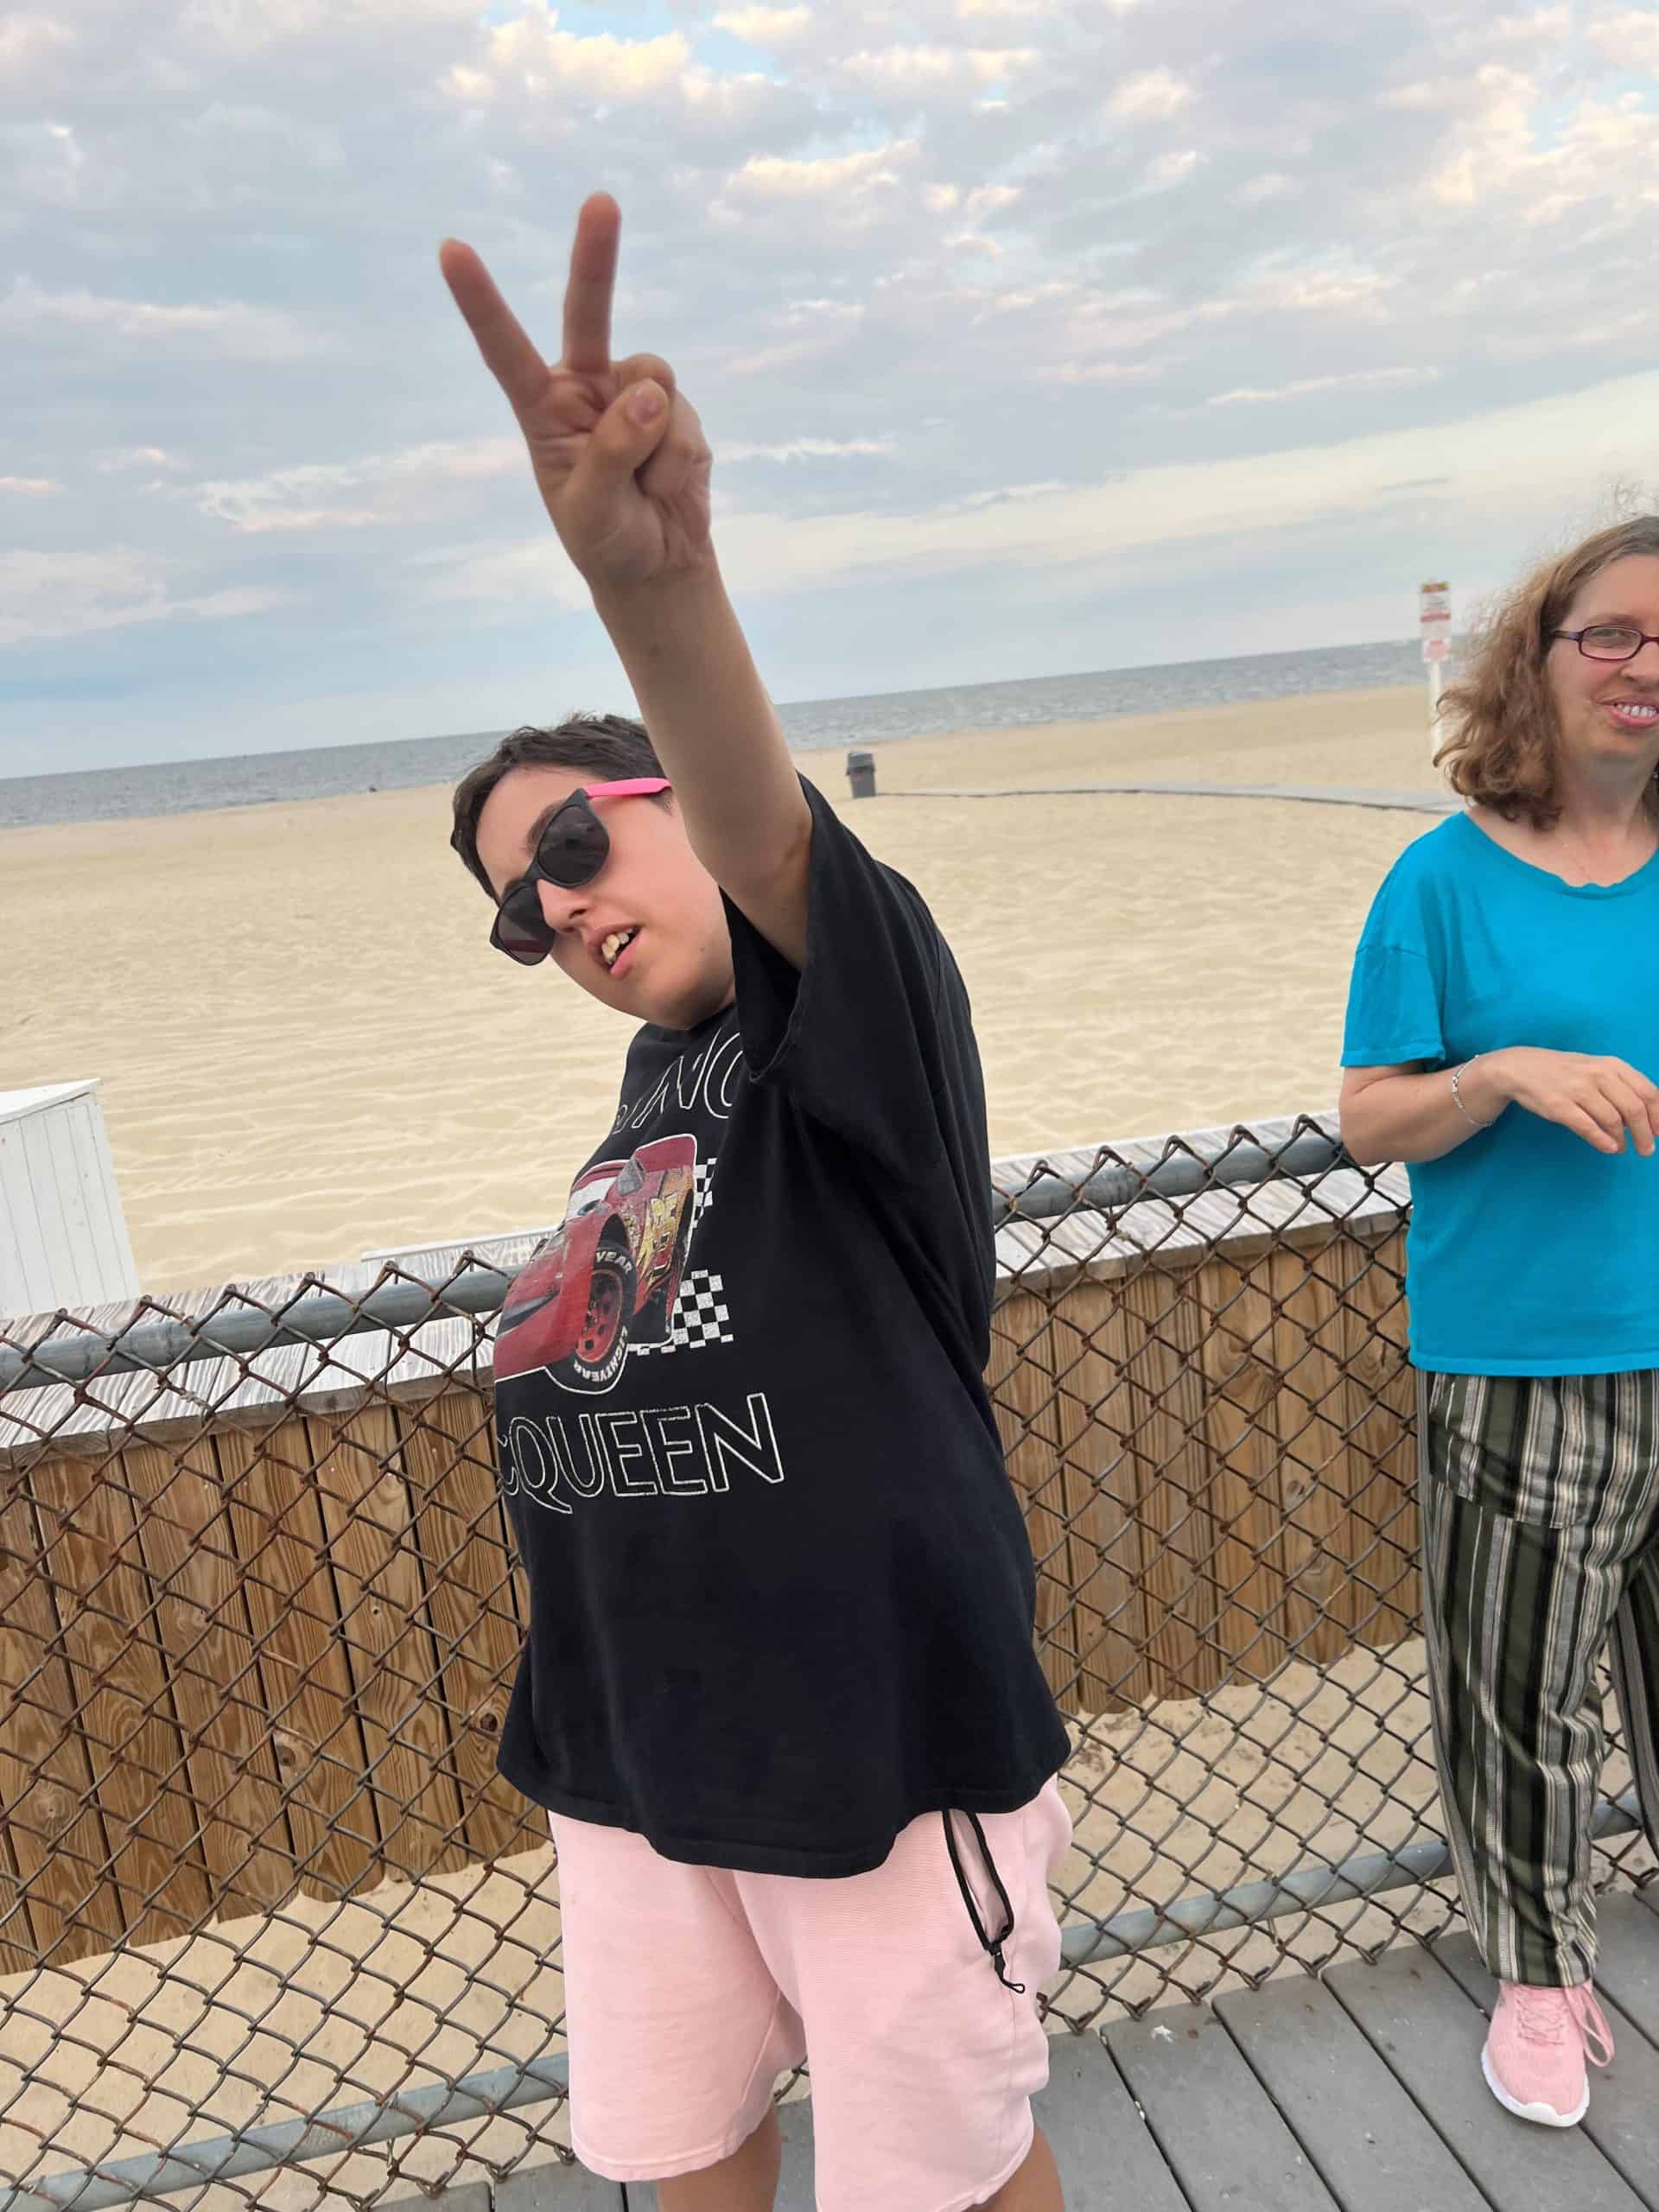 Young woman holding up a peace sign on the boardwalk.